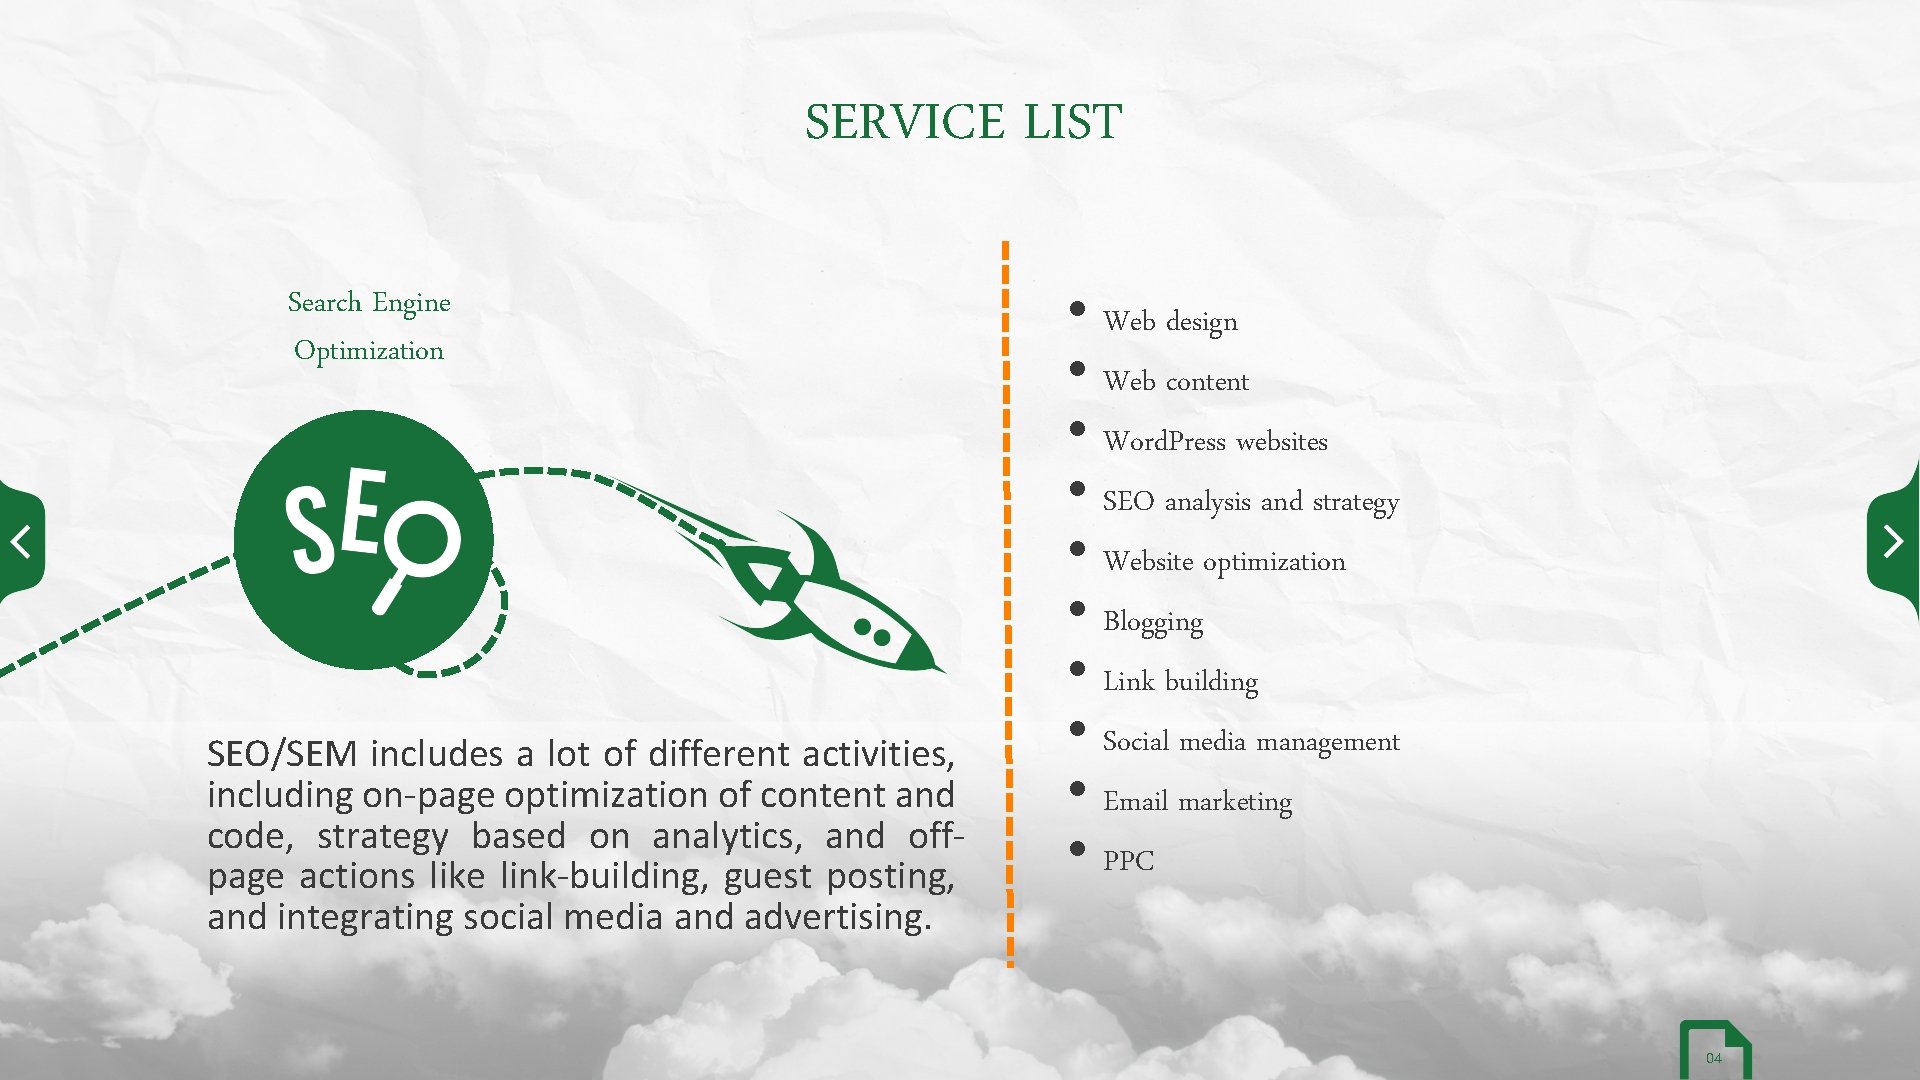 SERVICE LIST Search Engine Optimization SEO/SEM includes a lot of different activities, including on-page